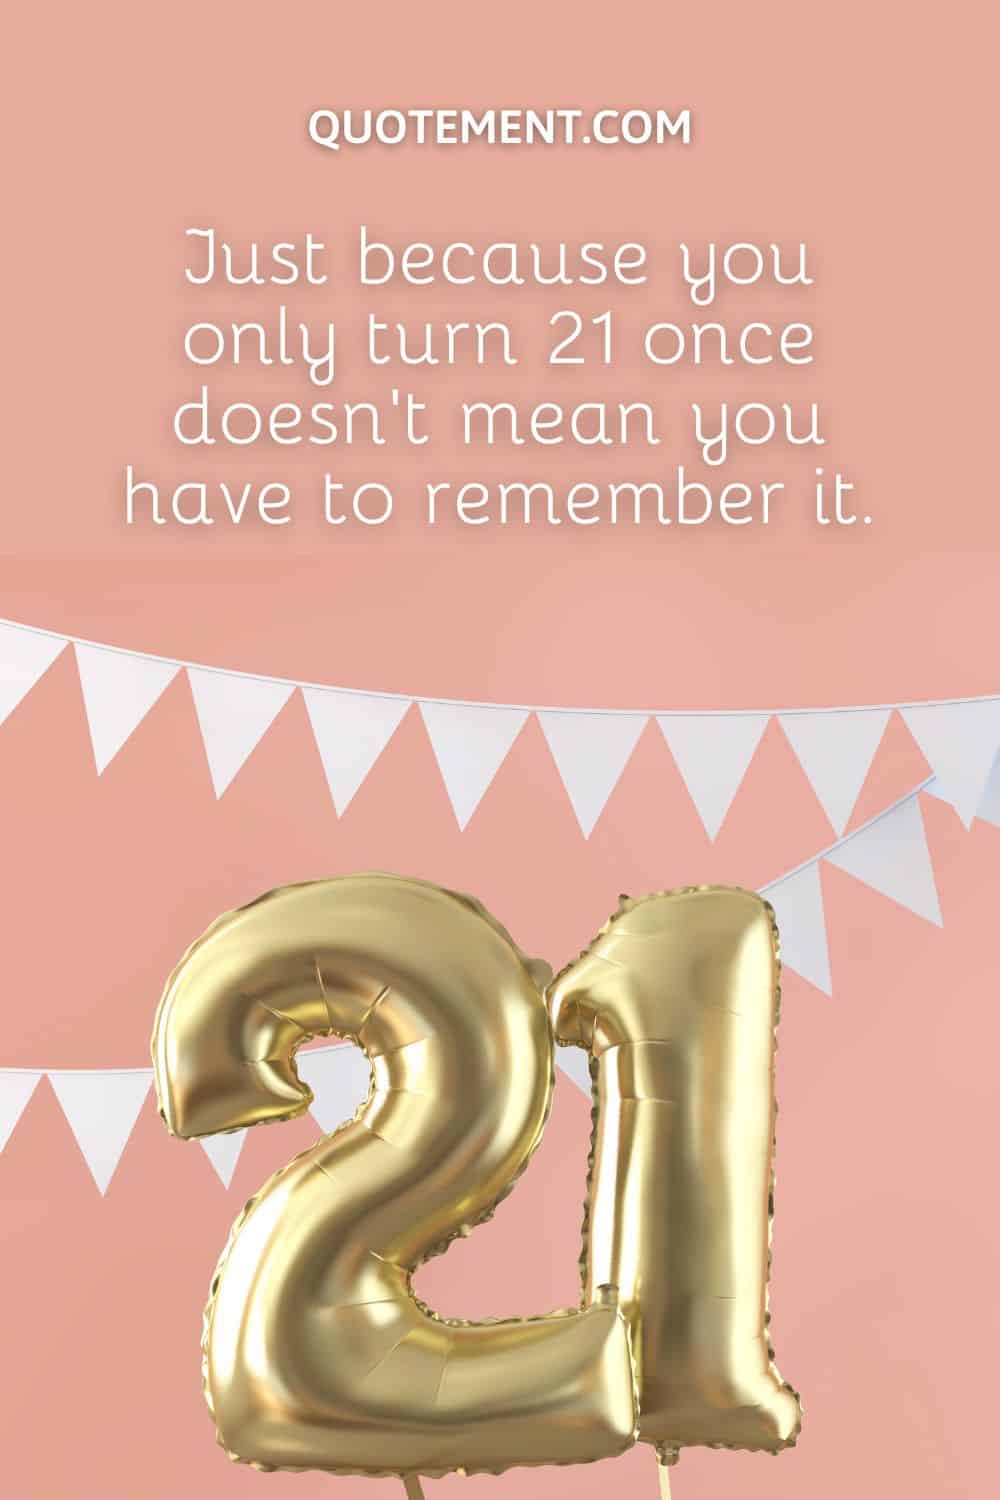 Just because you only turn 21 once doesn’t mean you have to remember it